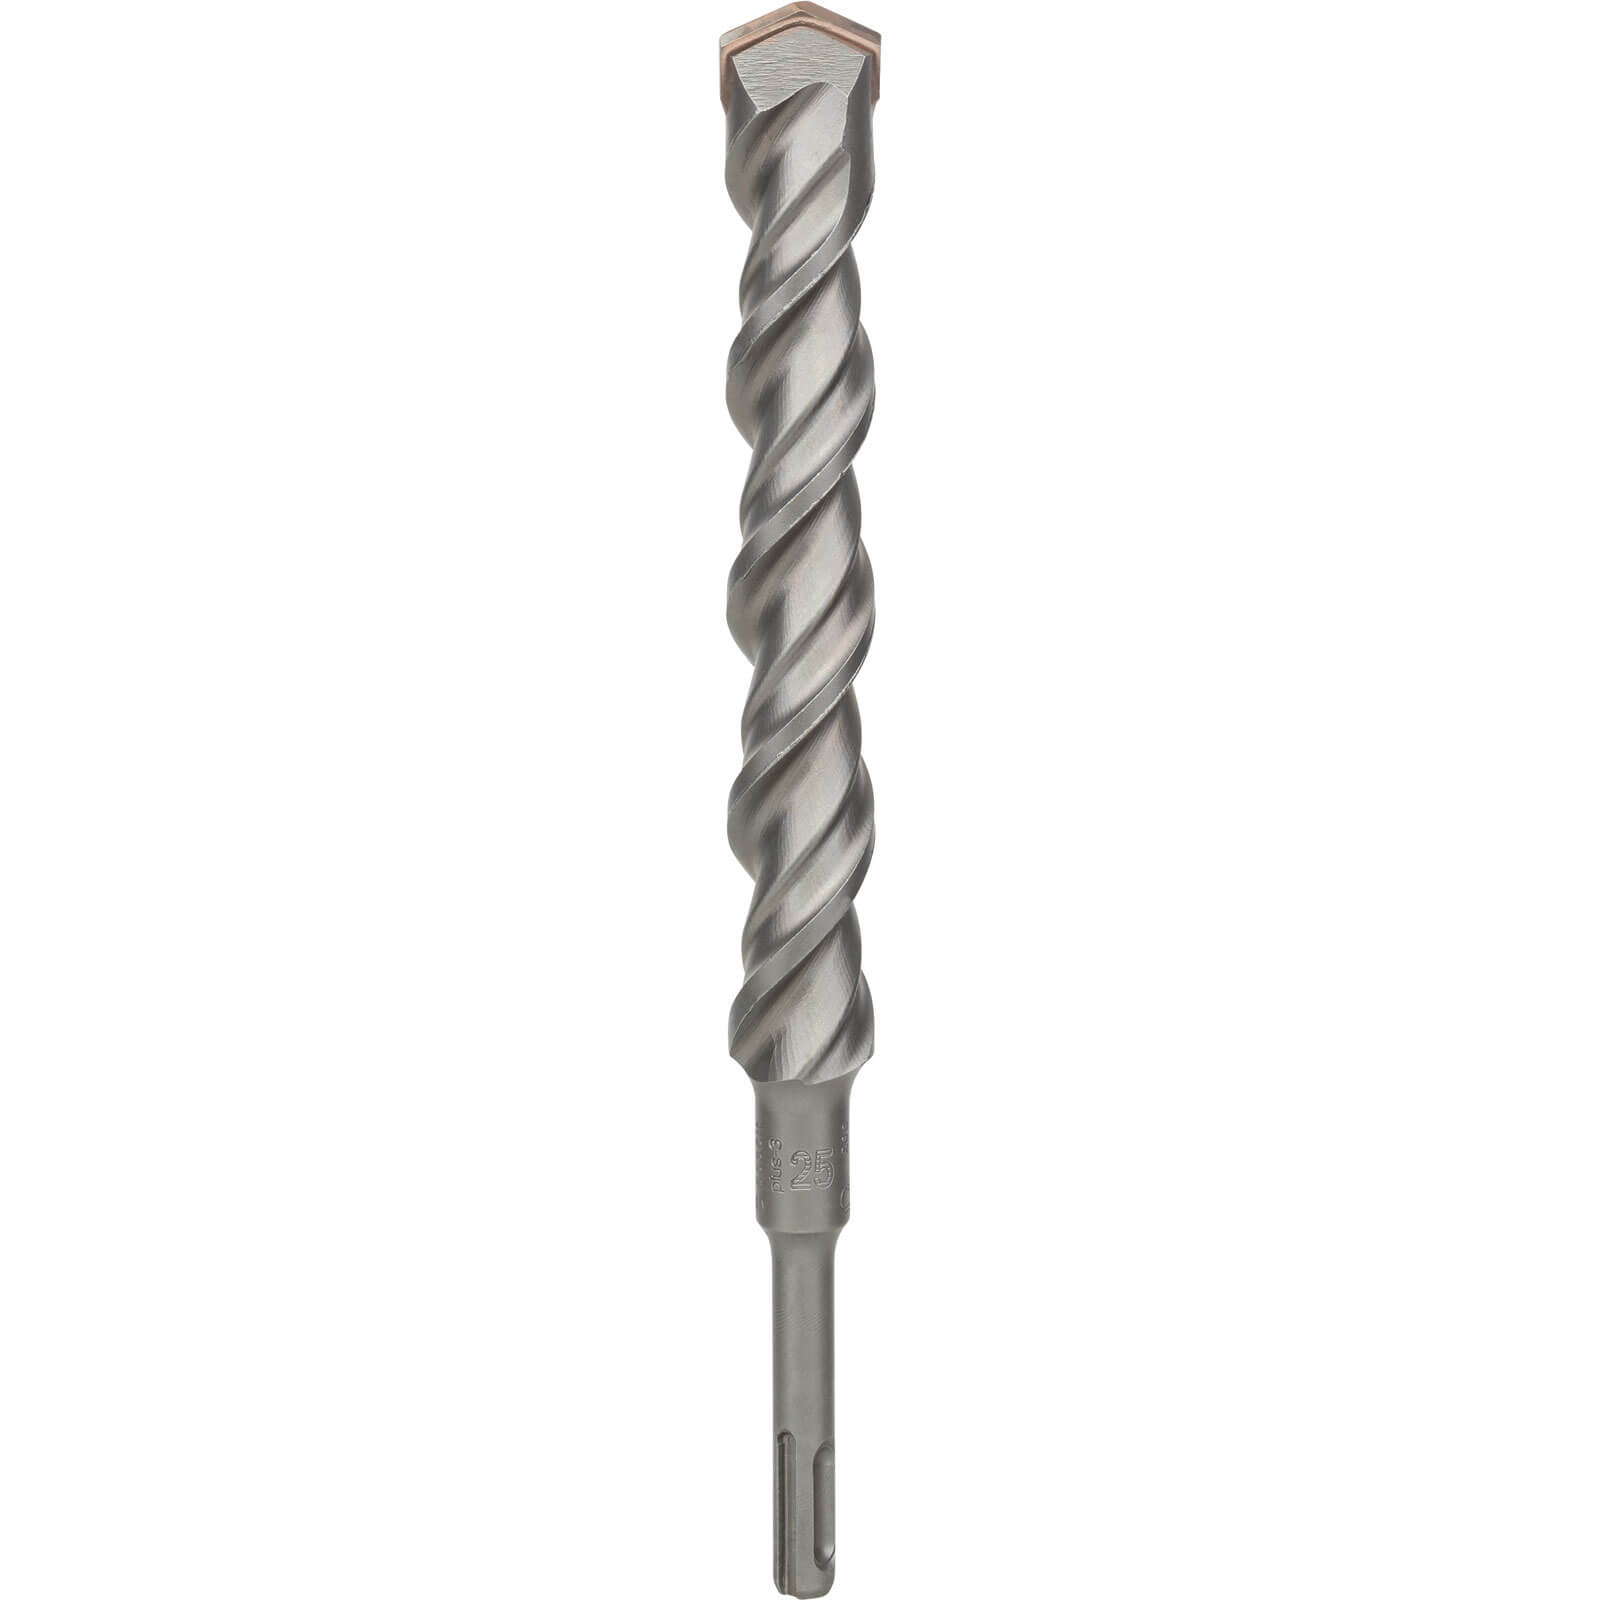 Image of Bosch Series 3 SDS Plus Masonry Drill Bit 25mm 250mm Pack of 1